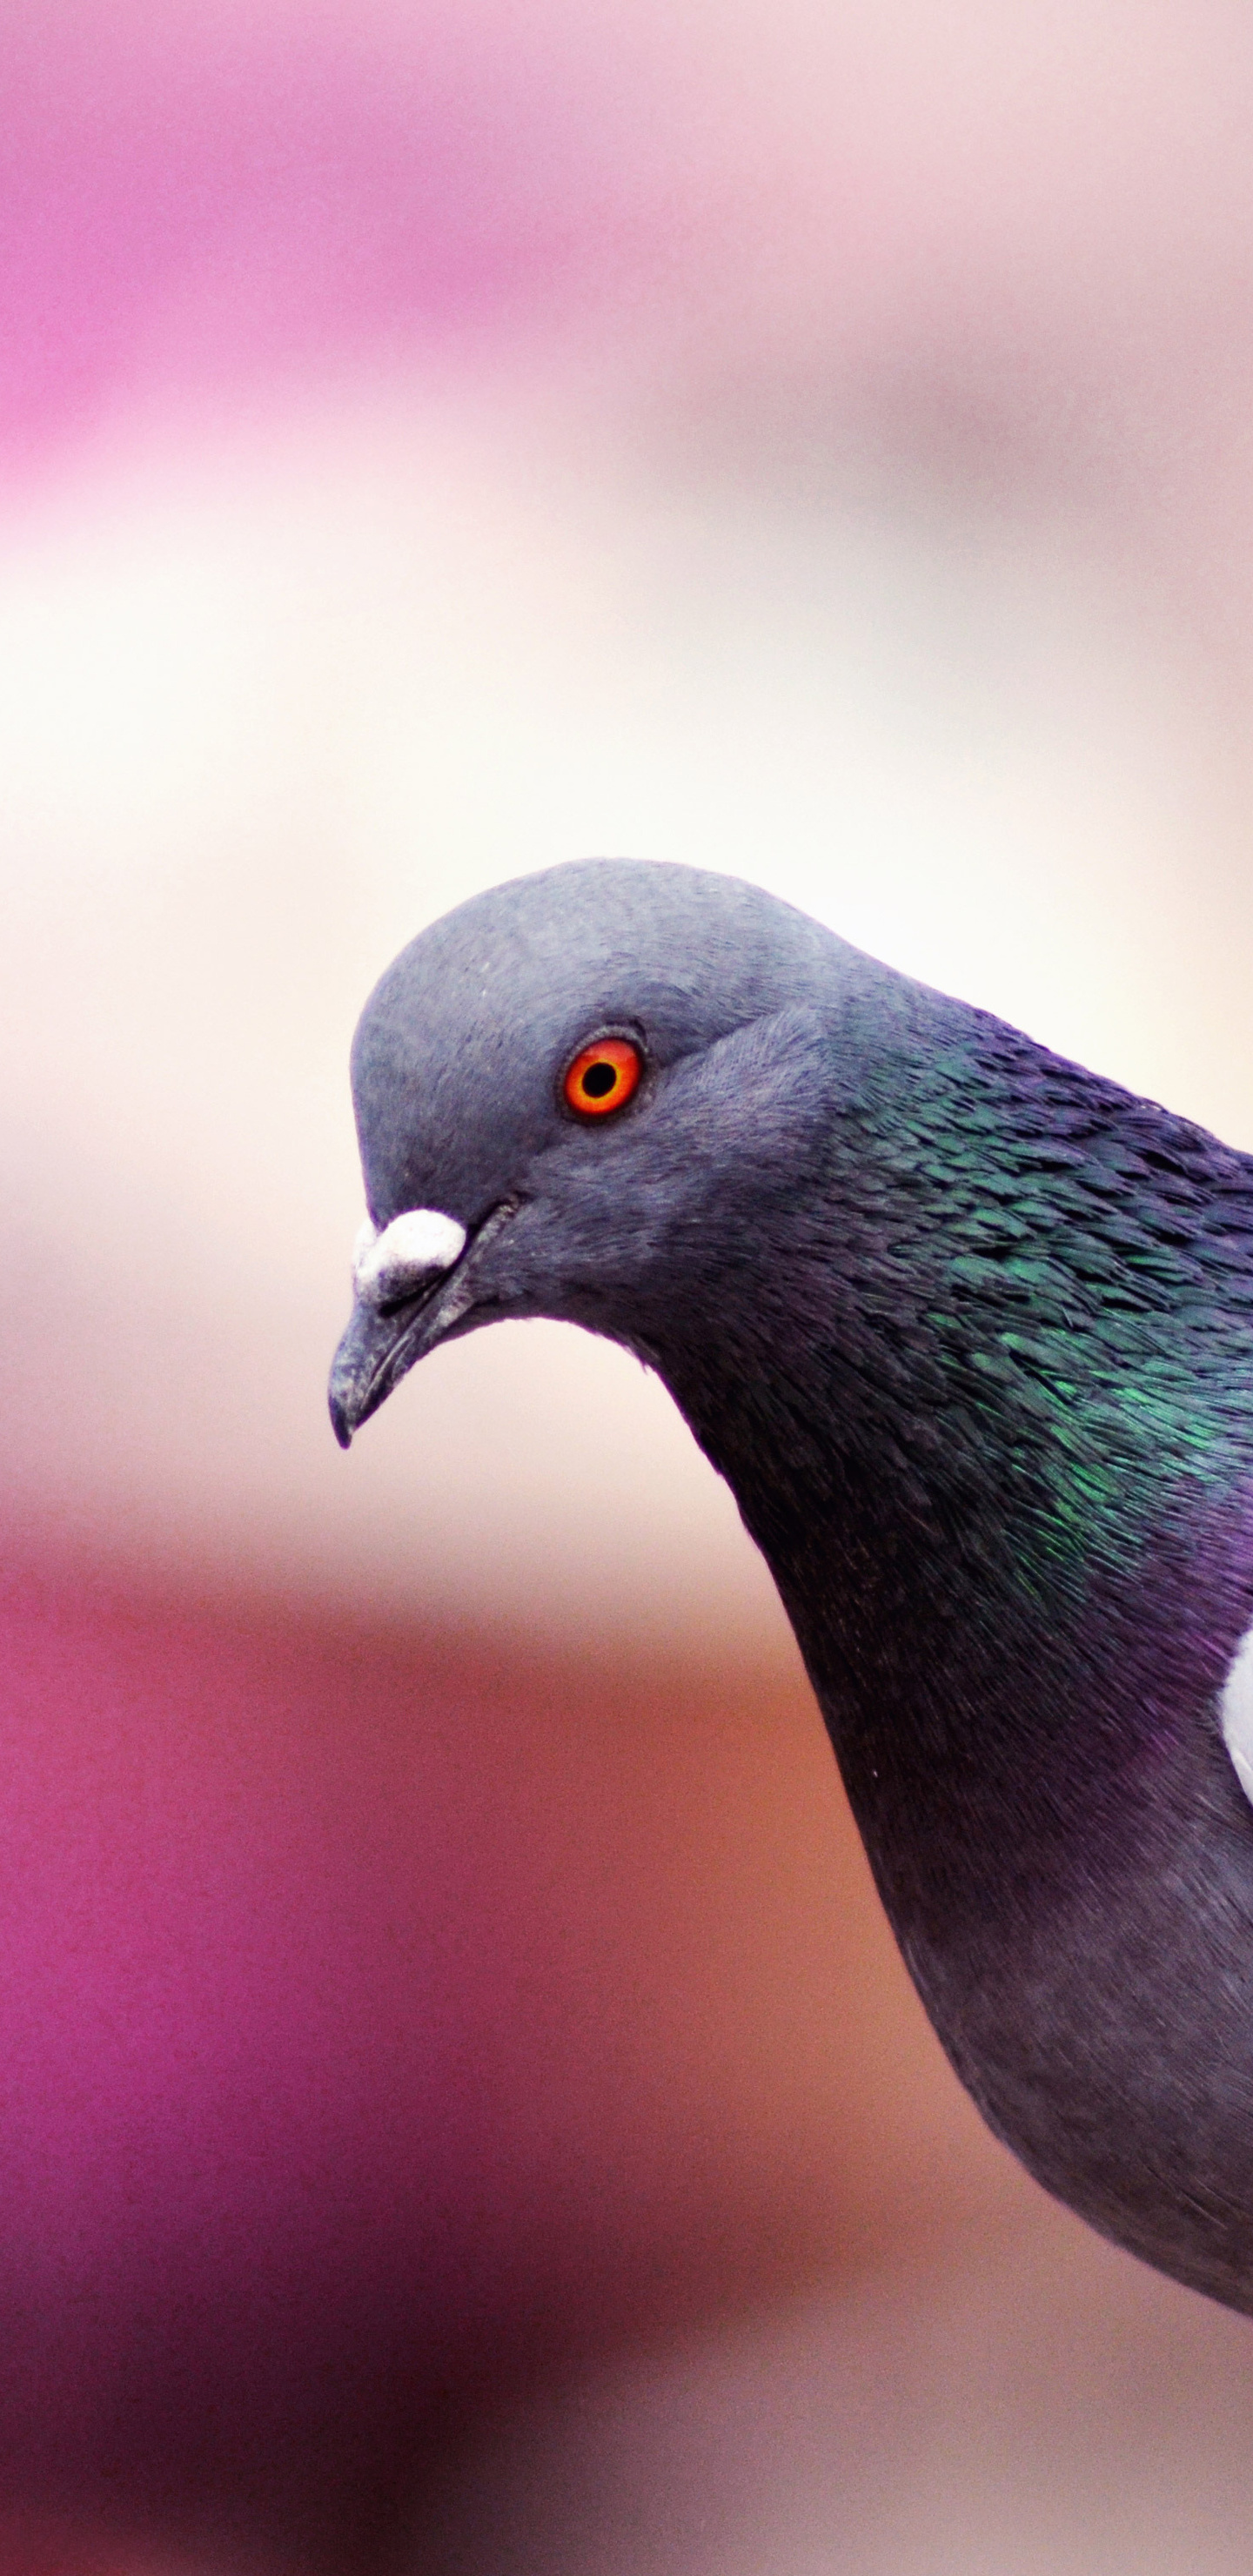 Pigeon: Social animals and often form large flocks, especially in urban areas. 1440x2960 HD Background.